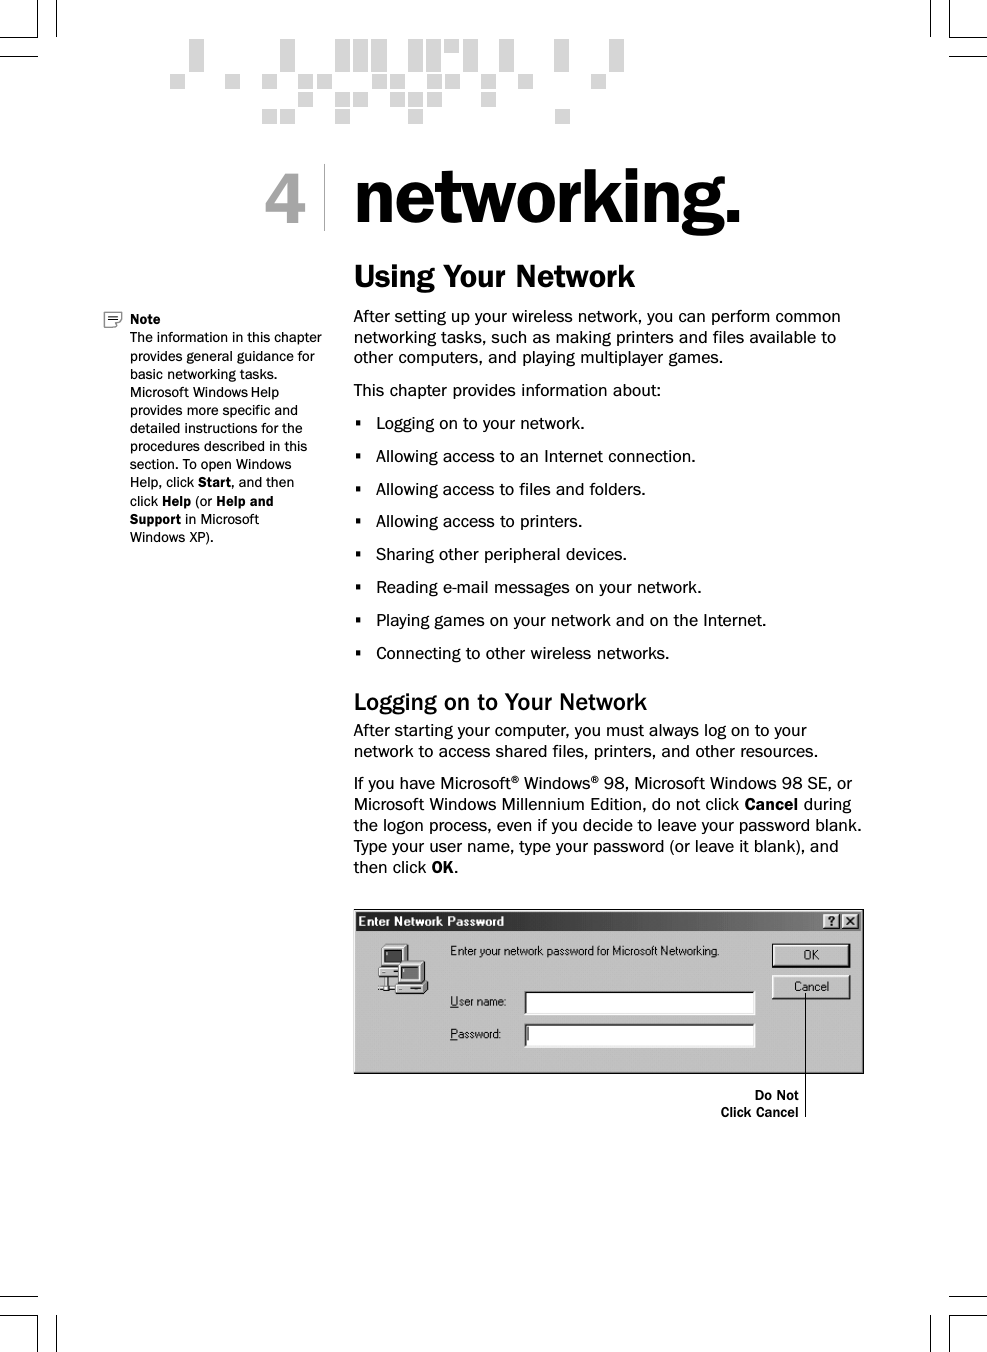 networking.Using Your NetworkAfter setting up your wireless network, you can perform commonnetworking tasks, such as making printers and files available toother computers, and playing multiplayer games.This chapter provides information about:•Logging on to your network.•Allowing access to an Internet connection.•Allowing access to files and folders.•Allowing access to printers.•Sharing other peripheral devices.•Reading e-mail messages on your network.•Playing games on your network and on the Internet.•Connecting to other wireless networks.Logging on to Your NetworkAfter starting your computer, you must always log on to yournetwork to access shared files, printers, and other resources.If you have Microsoft® Windows® 98, Microsoft Windows 98 SE, orMicrosoft Windows Millennium Edition, do not click Cancel duringthe logon process, even if you decide to leave your password blank.Type your user name, type your password (or leave it blank), andthen click OK.4Note   The information in this chapterprovides general guidance forbasic networking tasks.Microsoft Windows Helpprovides more specific anddetailed instructions for theprocedures described in thissection. To open WindowsHelp, click Start, and thenclick Help (or Help andSupport in MicrosoftWindows XP).Do NotClick Cancel